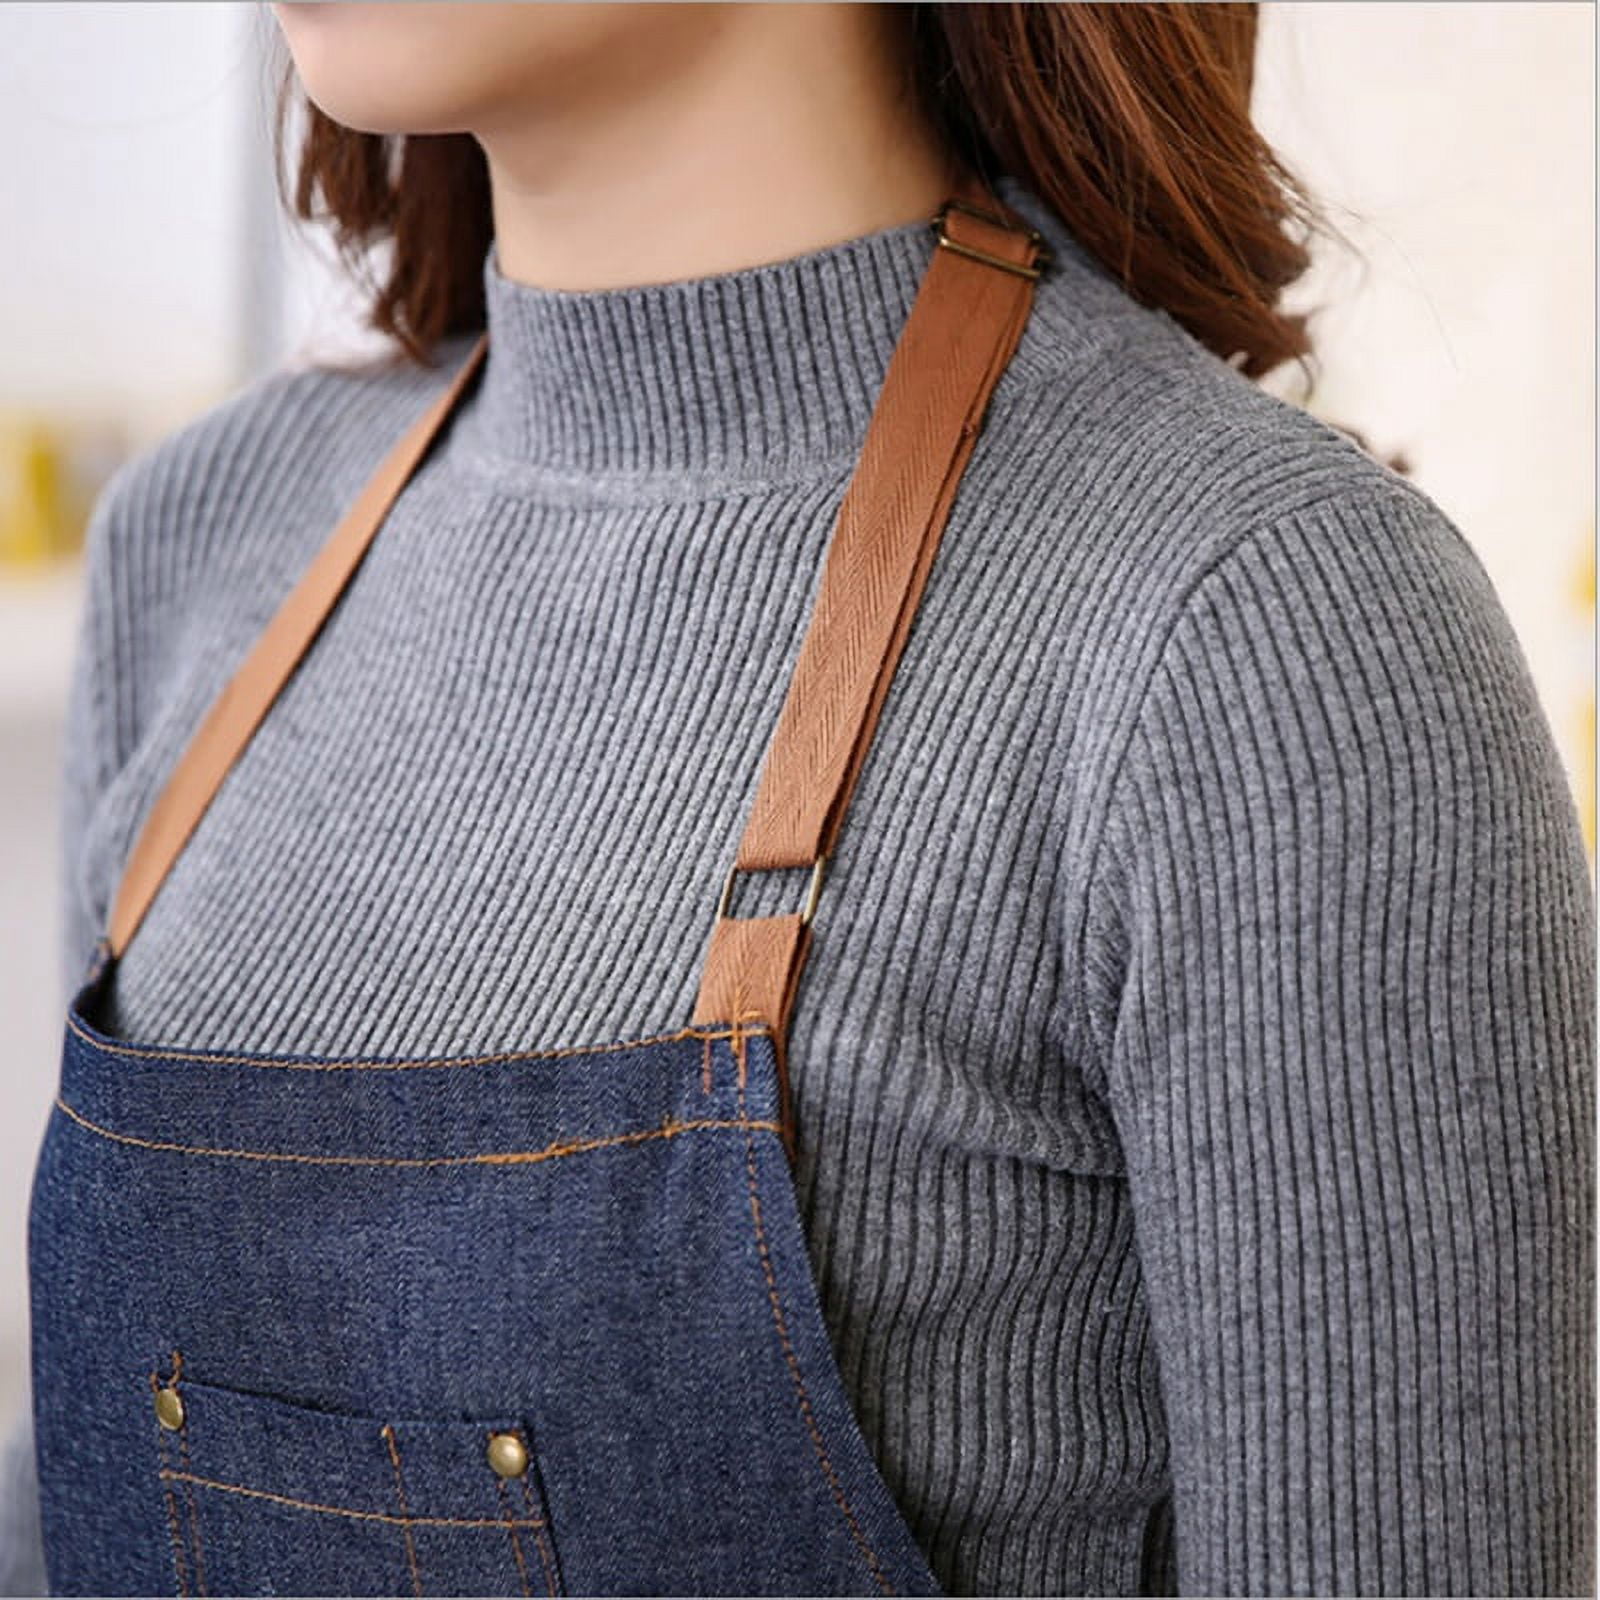 Andean Leather Denim Apron with Leather Straps, Jean Apron, Cooking Ap